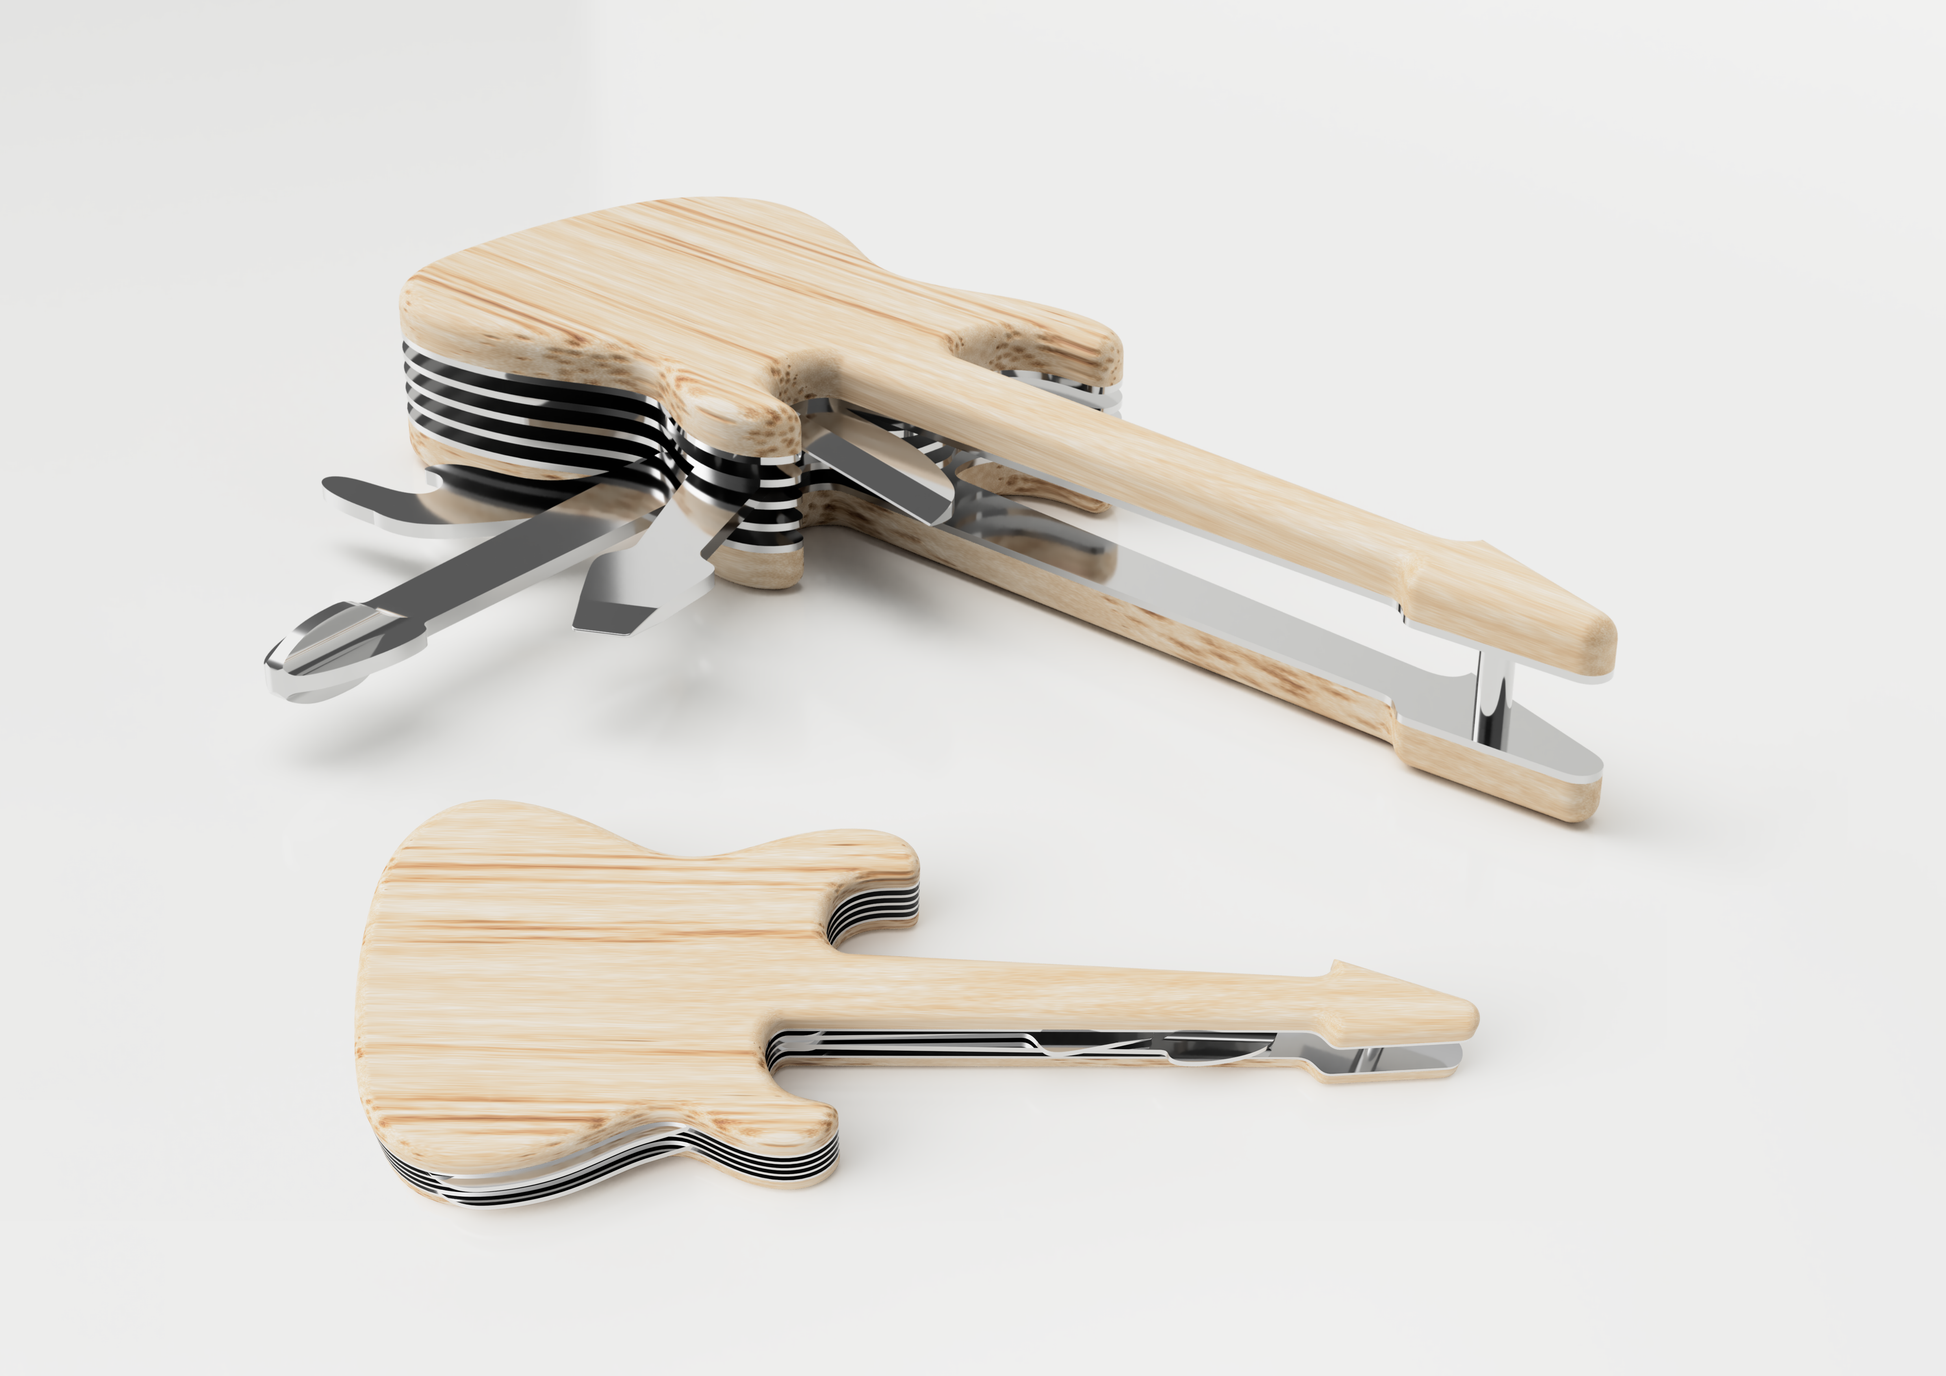 Guitar Multitool with tools fanned out and another Guitar Multitool closed.